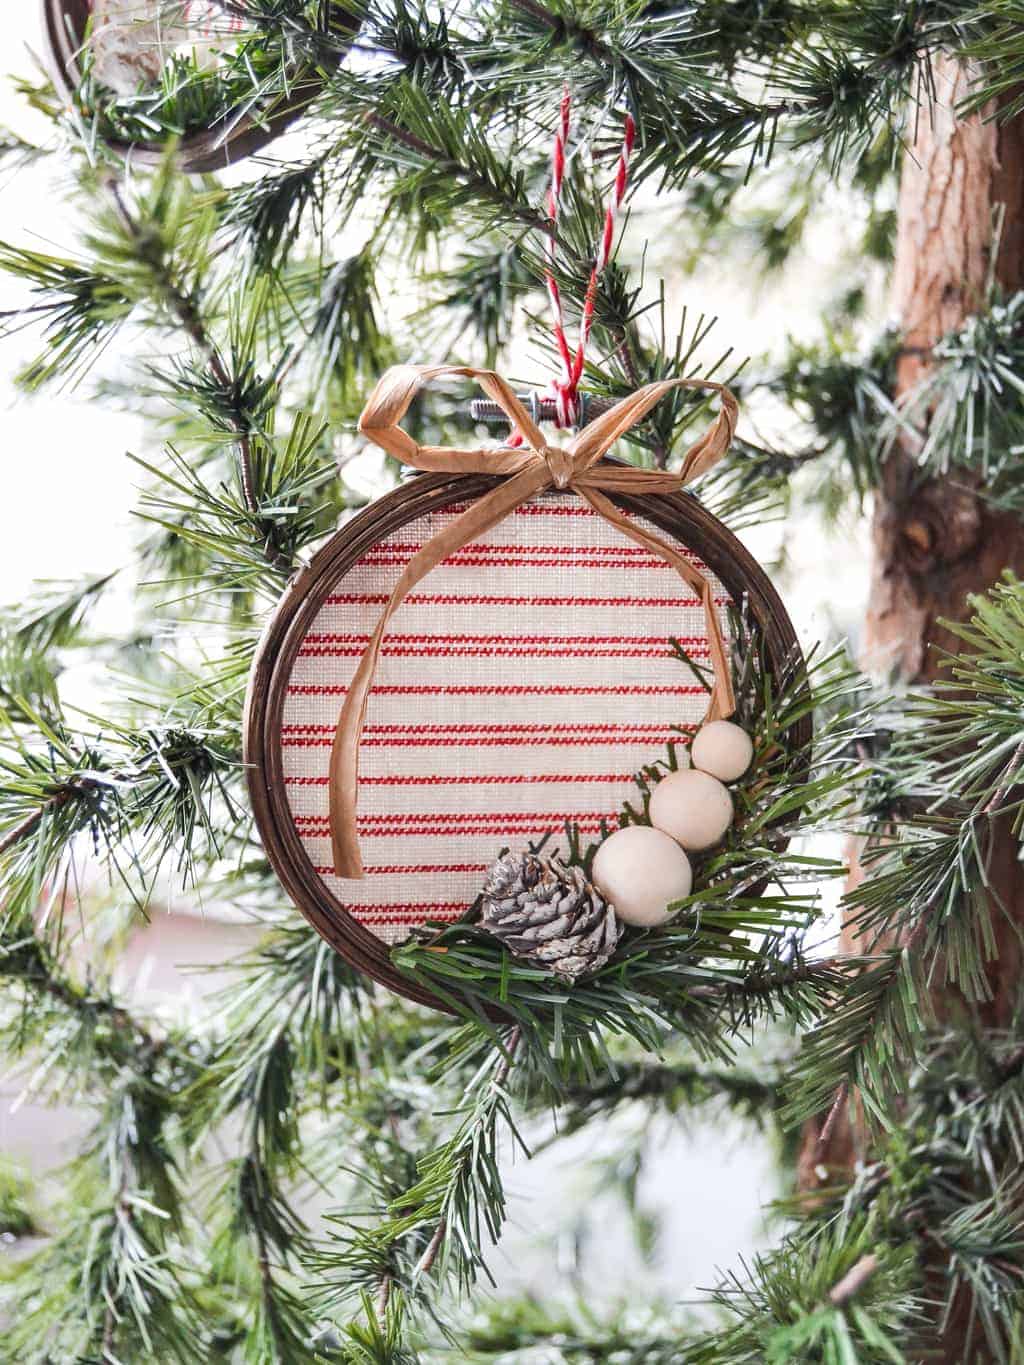 DIY Ribbon Christmas Ornaments (with video tutorial) - The Crafting Nook